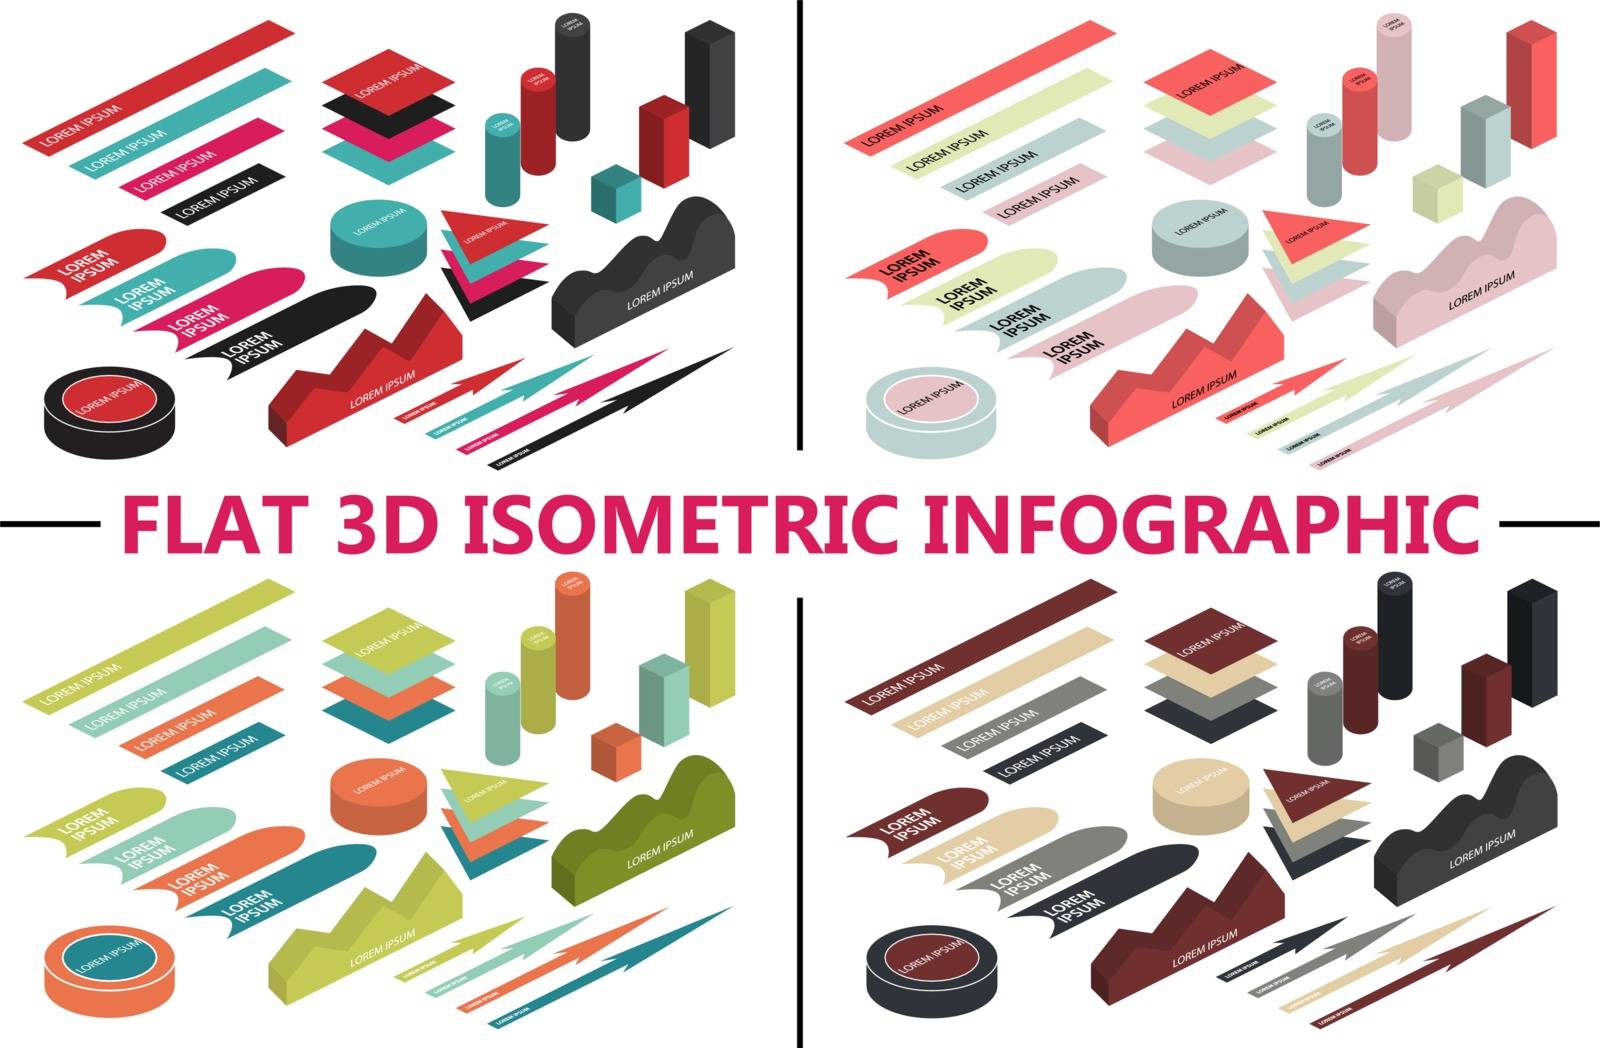 Flat 3d isometric infographic for your business presentations. Colorful isometric icons. 4 colors themes. Vector illustration EPS 10